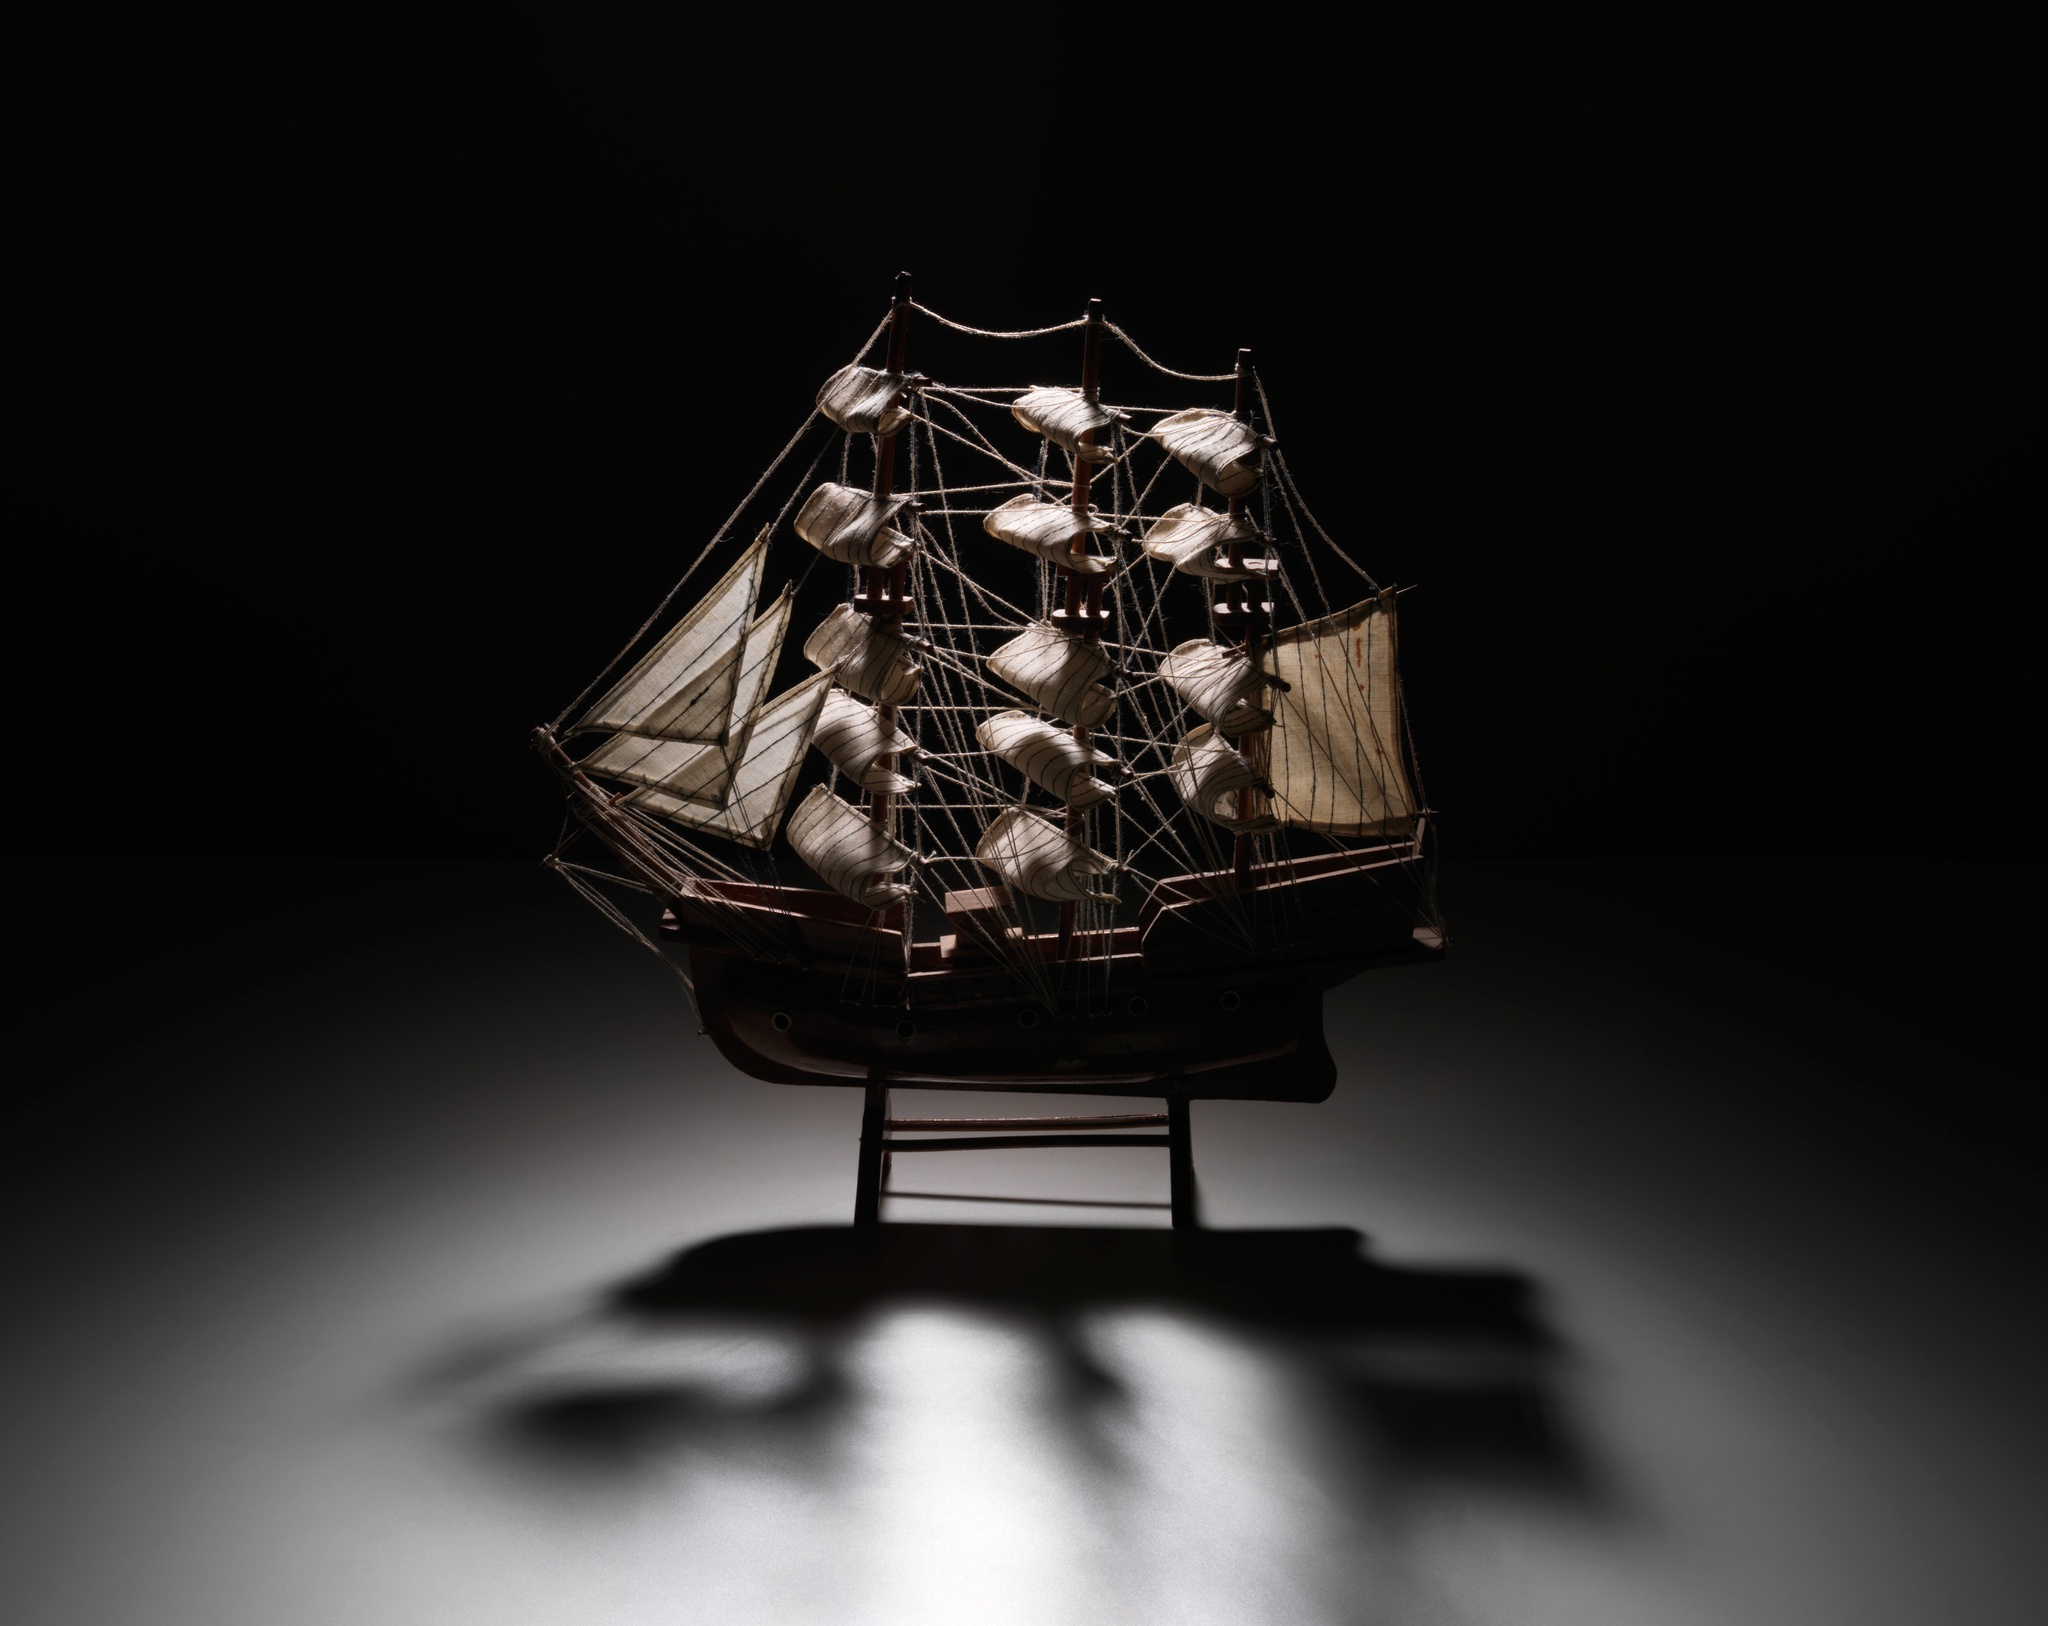 A dramatically lit model of a 17th-century ship against a black background